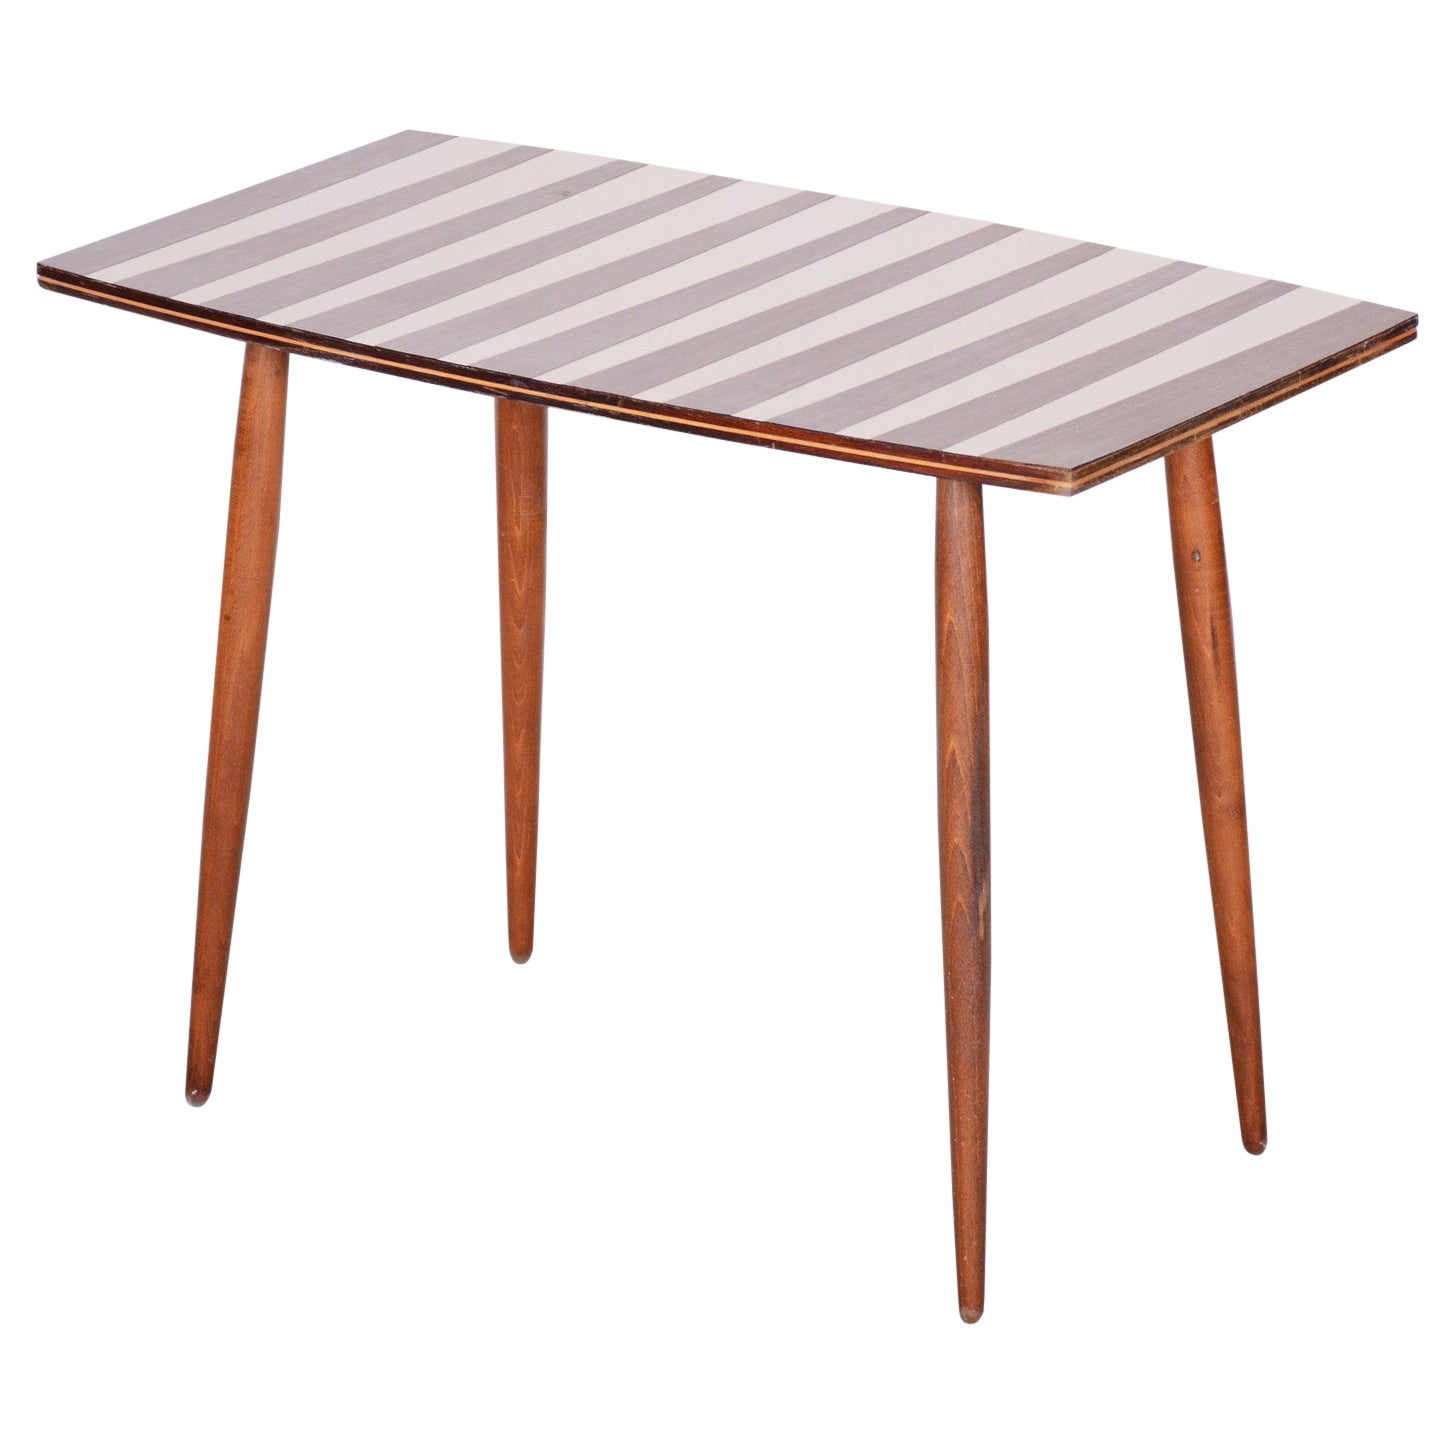 Beech Table, Czech Midcentury, Preserved in Original Condition, 1950s For Sale